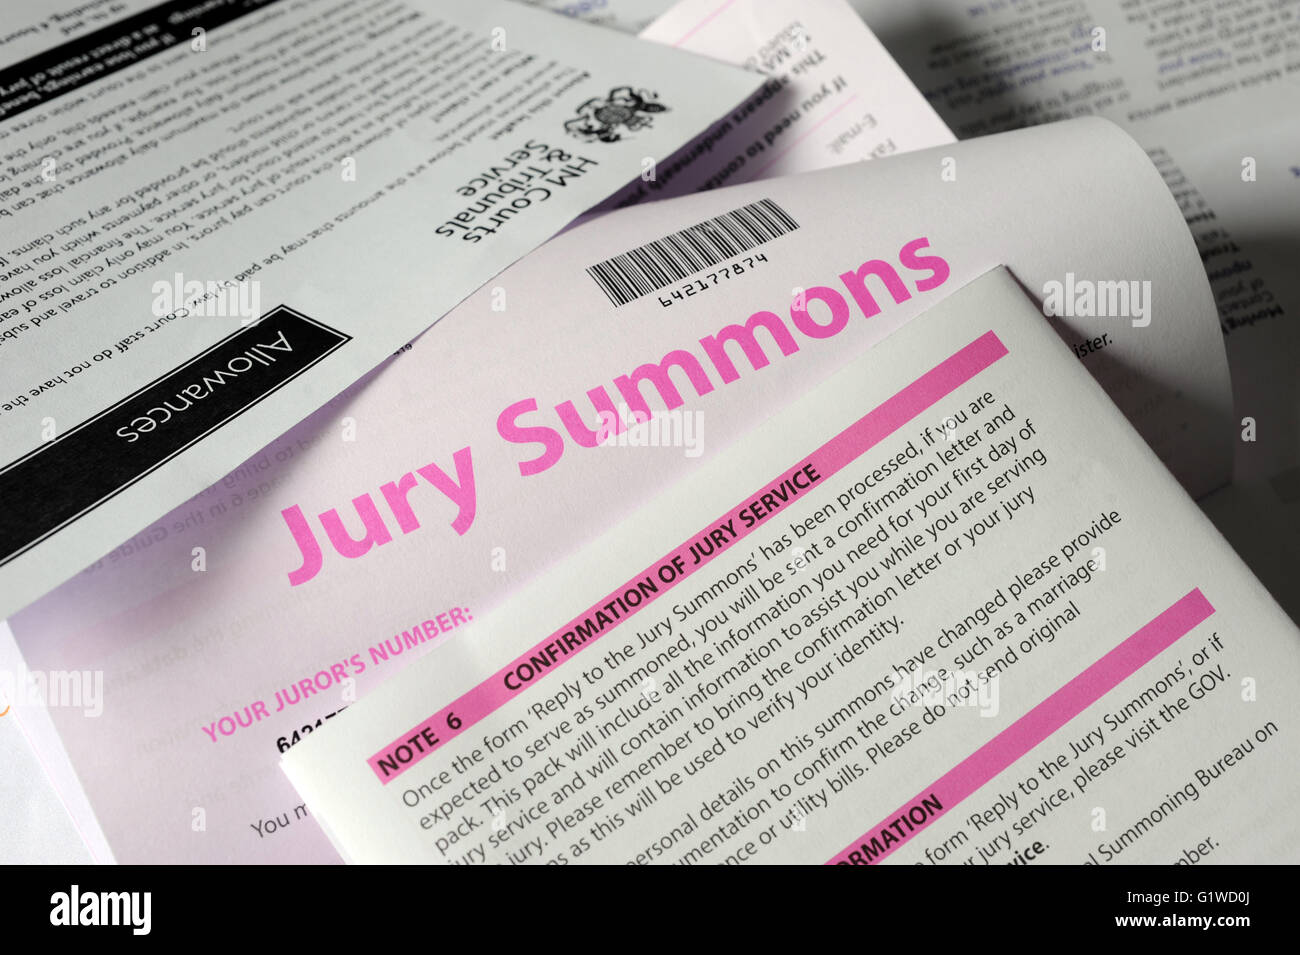 JURY SUMMONS LETTER FOR CONFIRMATION OF JURY SERVICE RE JURORS  LAW COURT CROWN MAGISTRATES HM COURTS  TRIBUNAL SERVICE JAIL UK Stock Photo